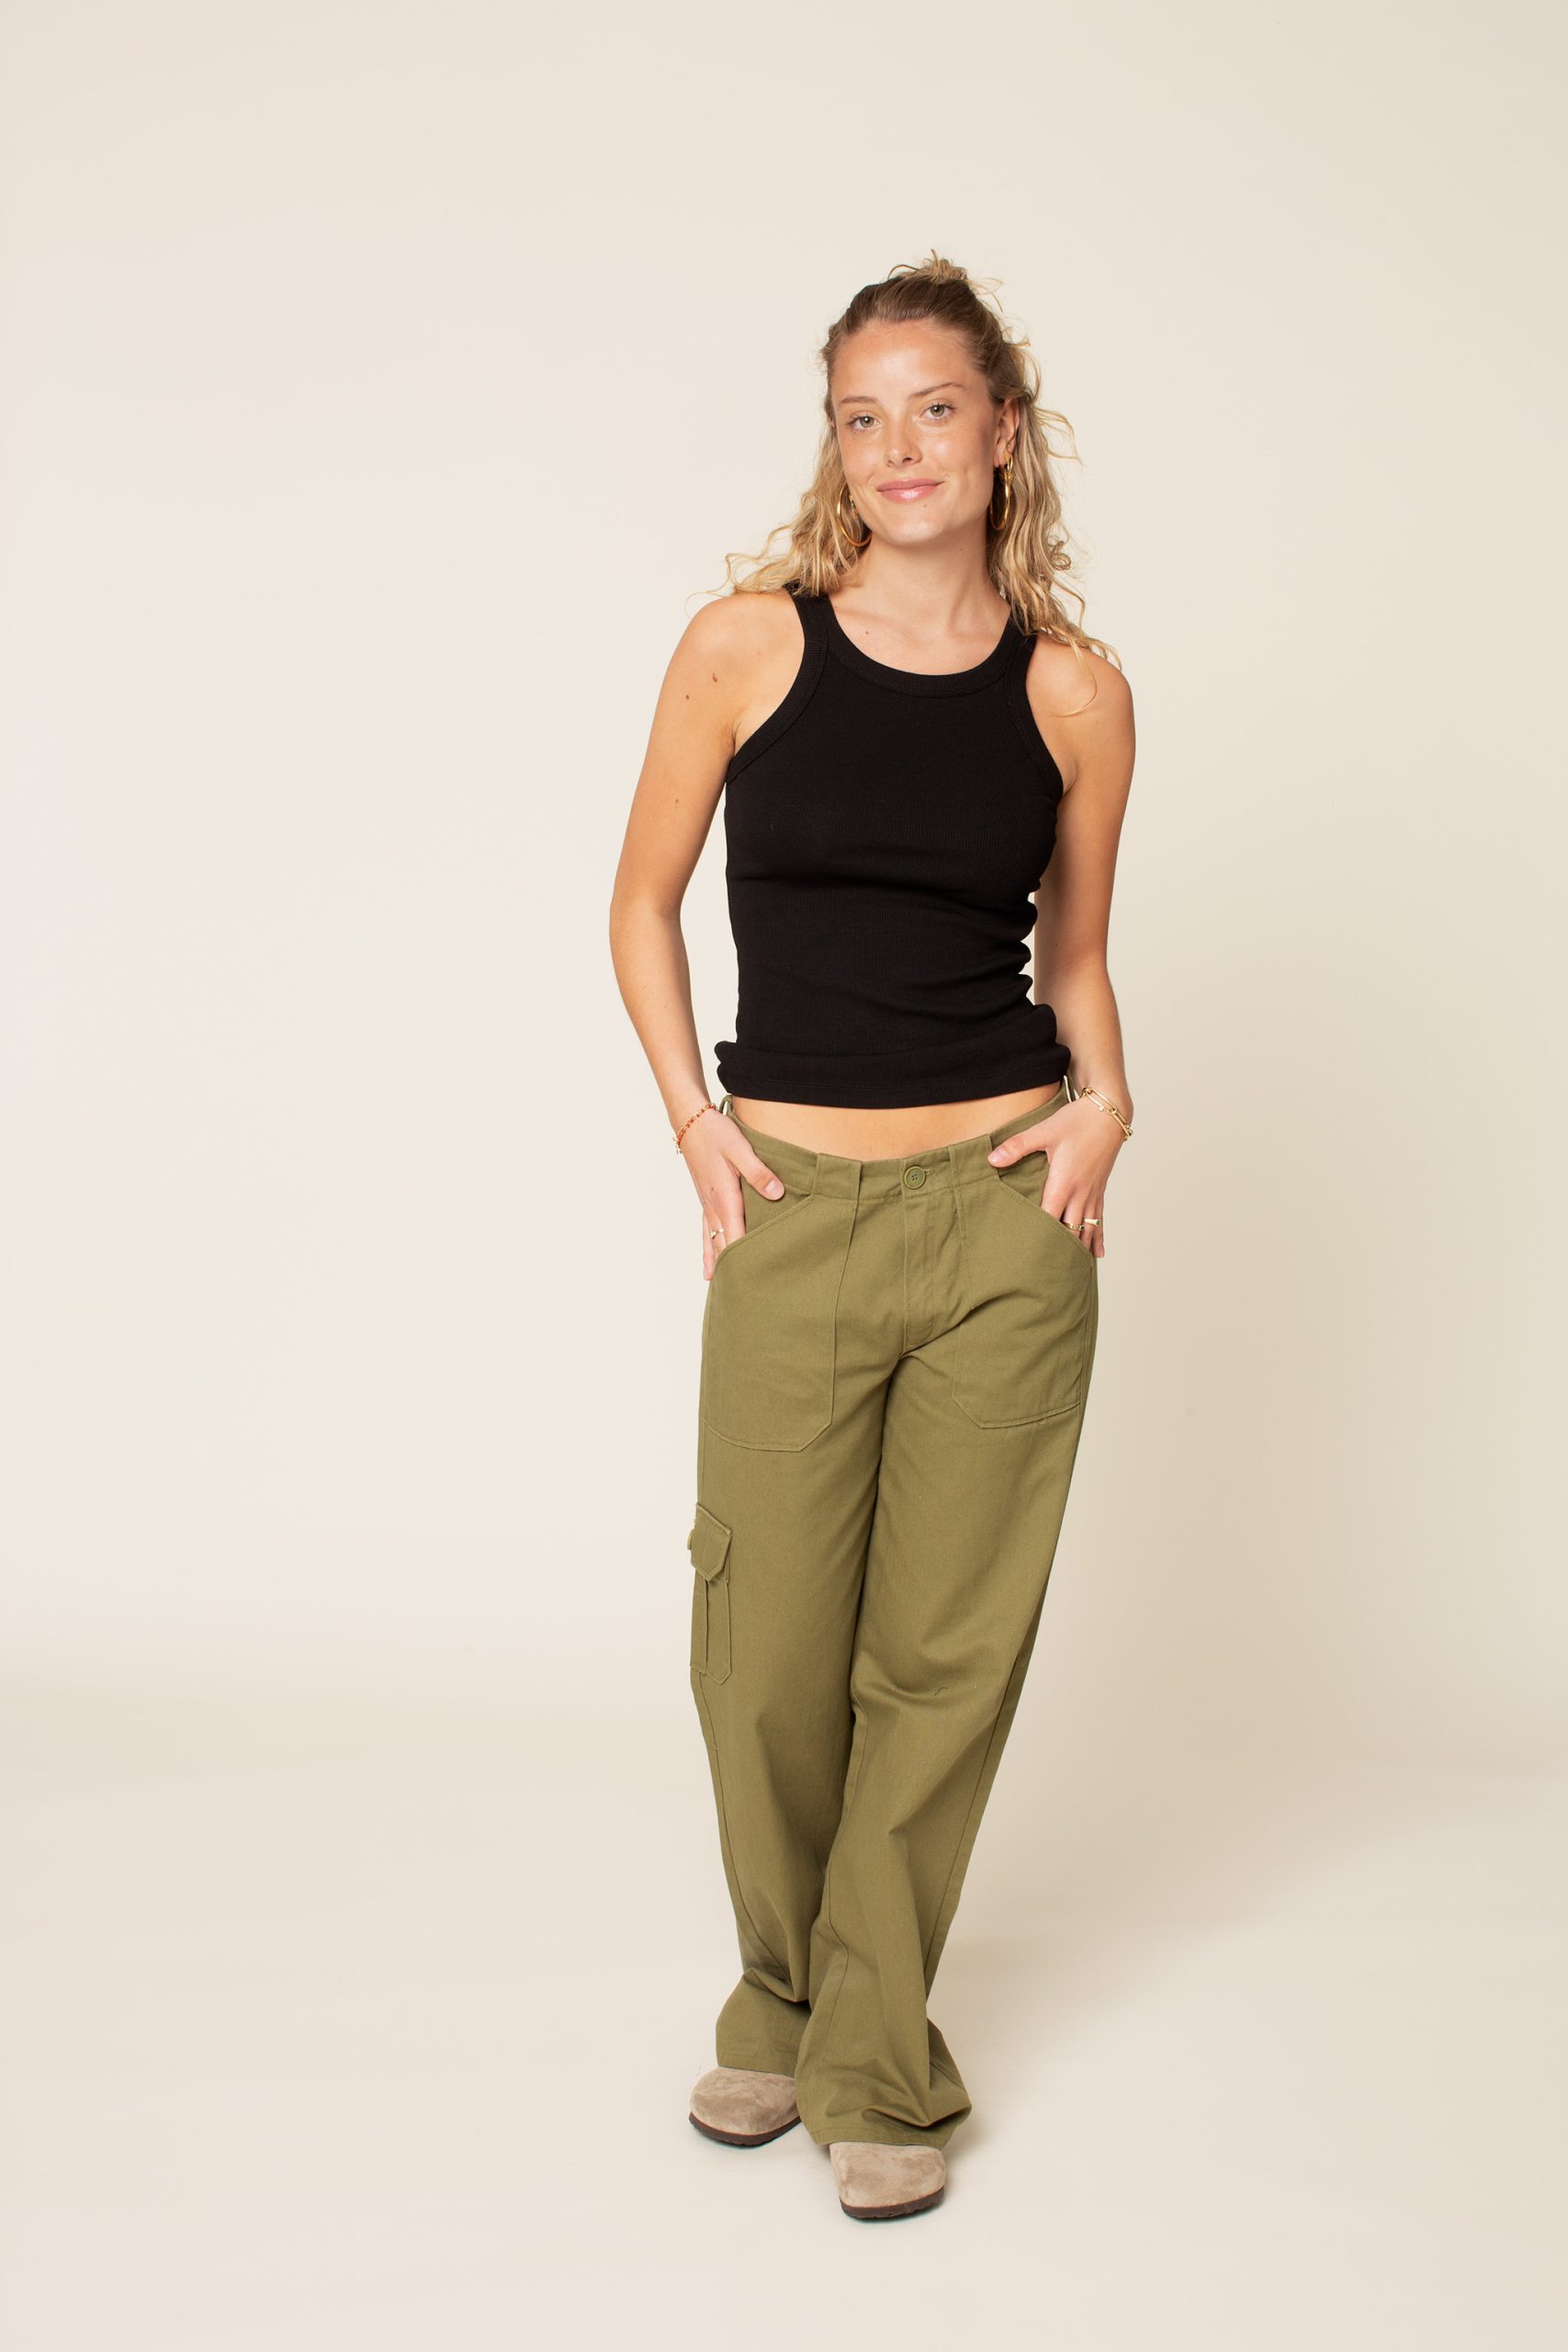 Cargo pants sewing pattern designed especially for girls